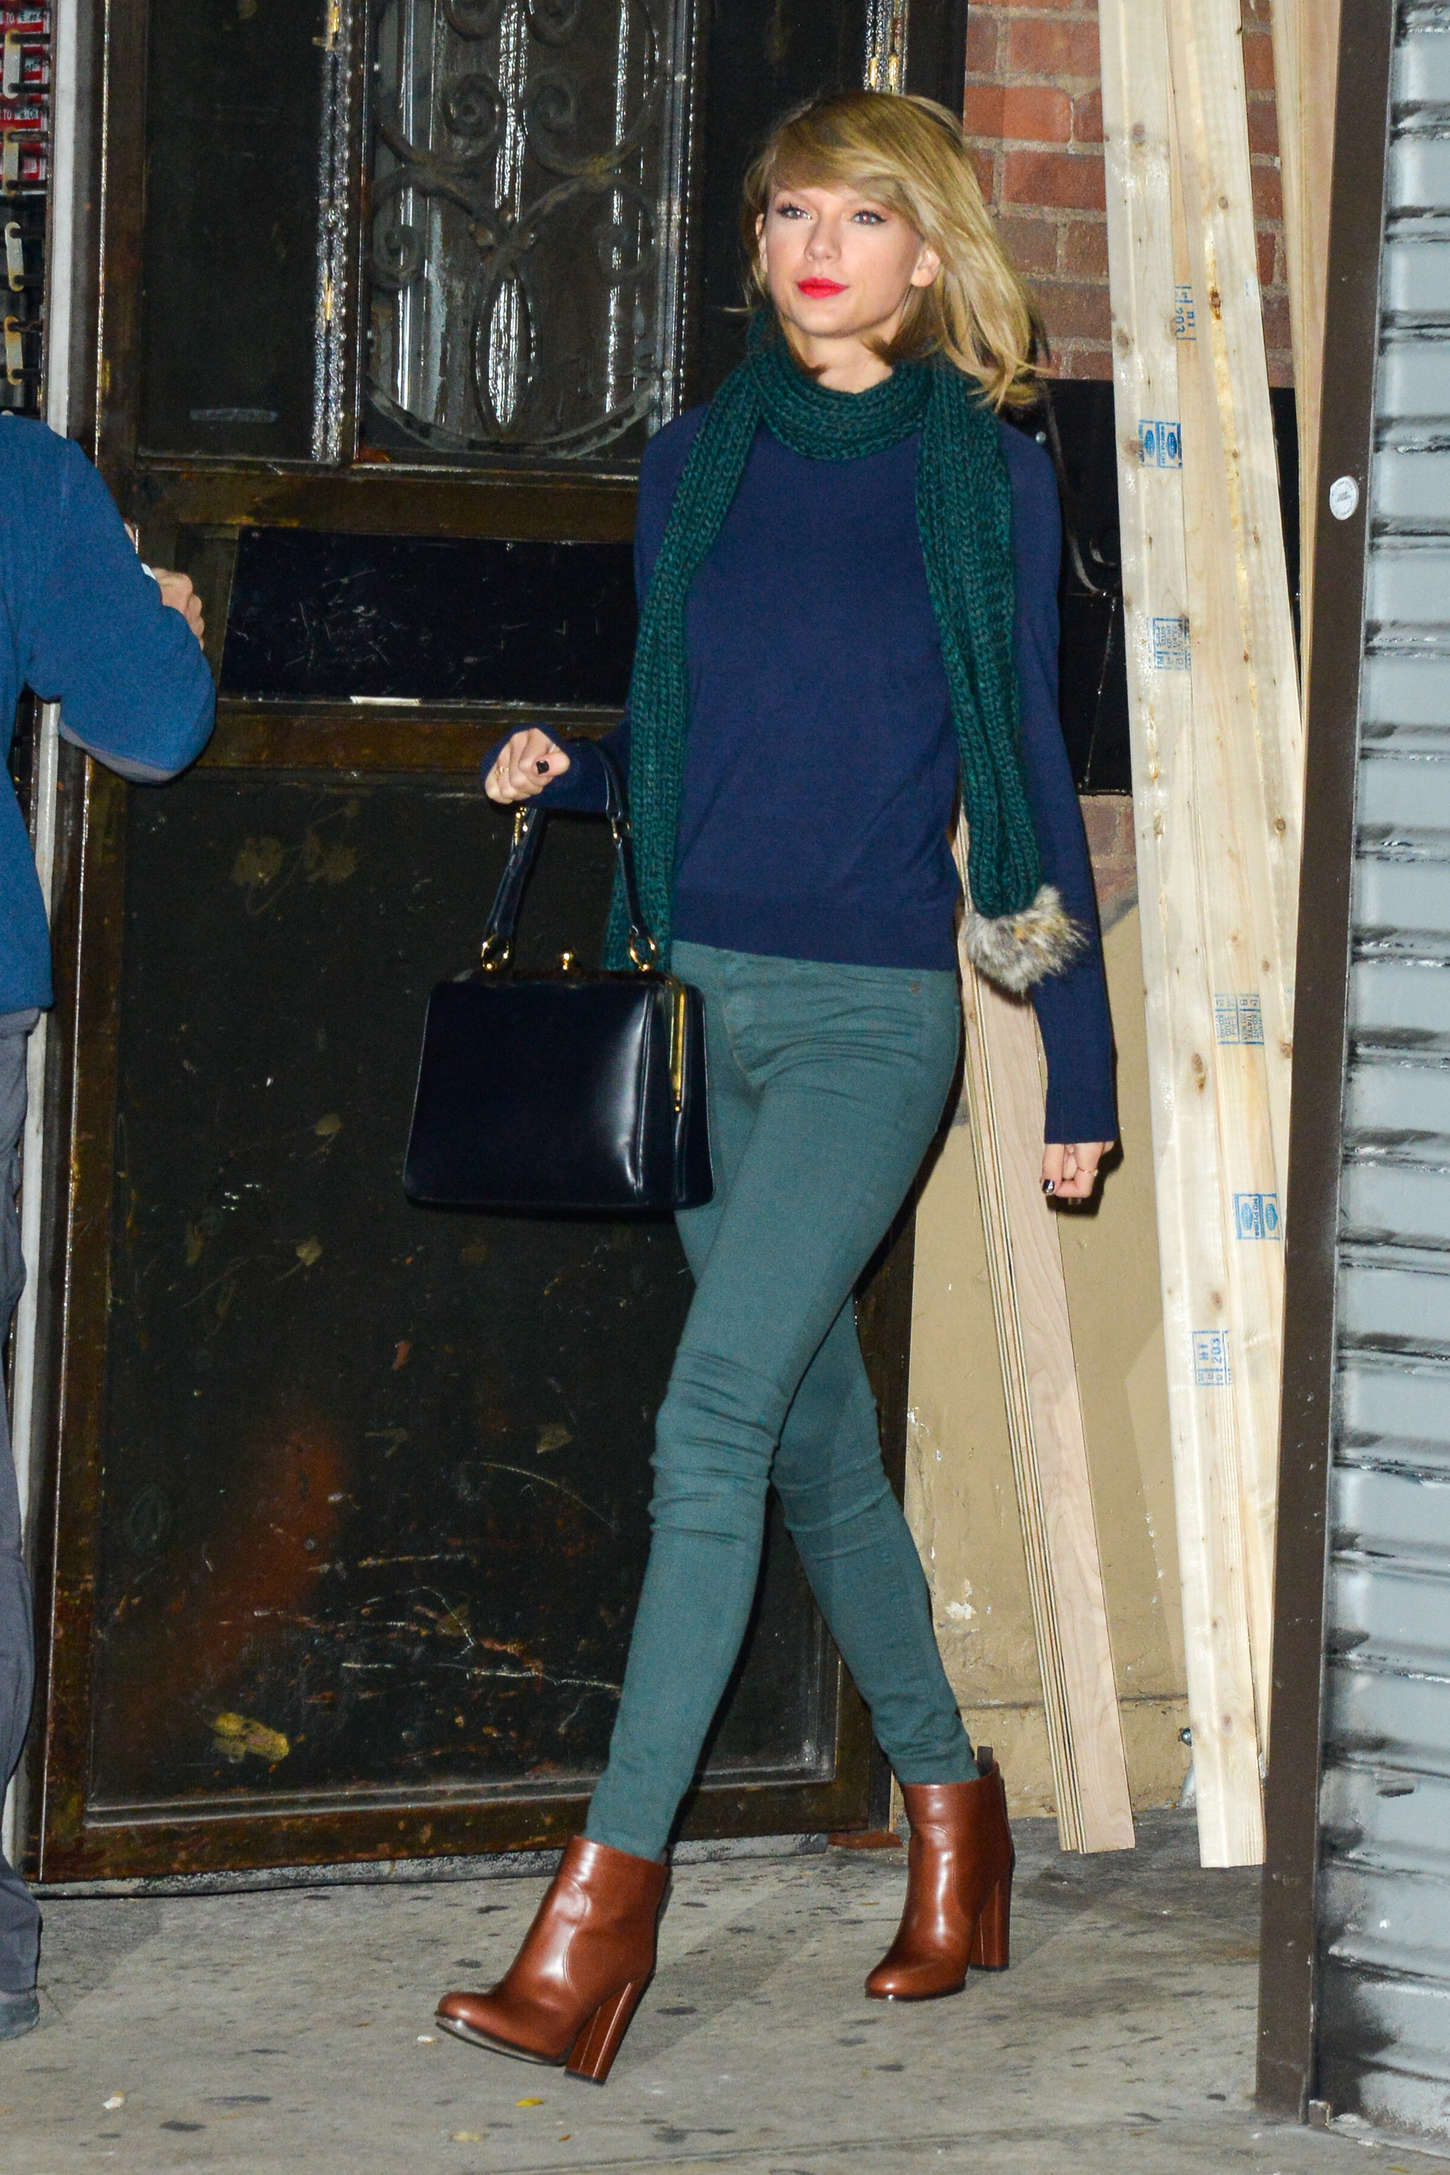 Taylor Swift in Green Tight Jeans -04 – GotCeleb